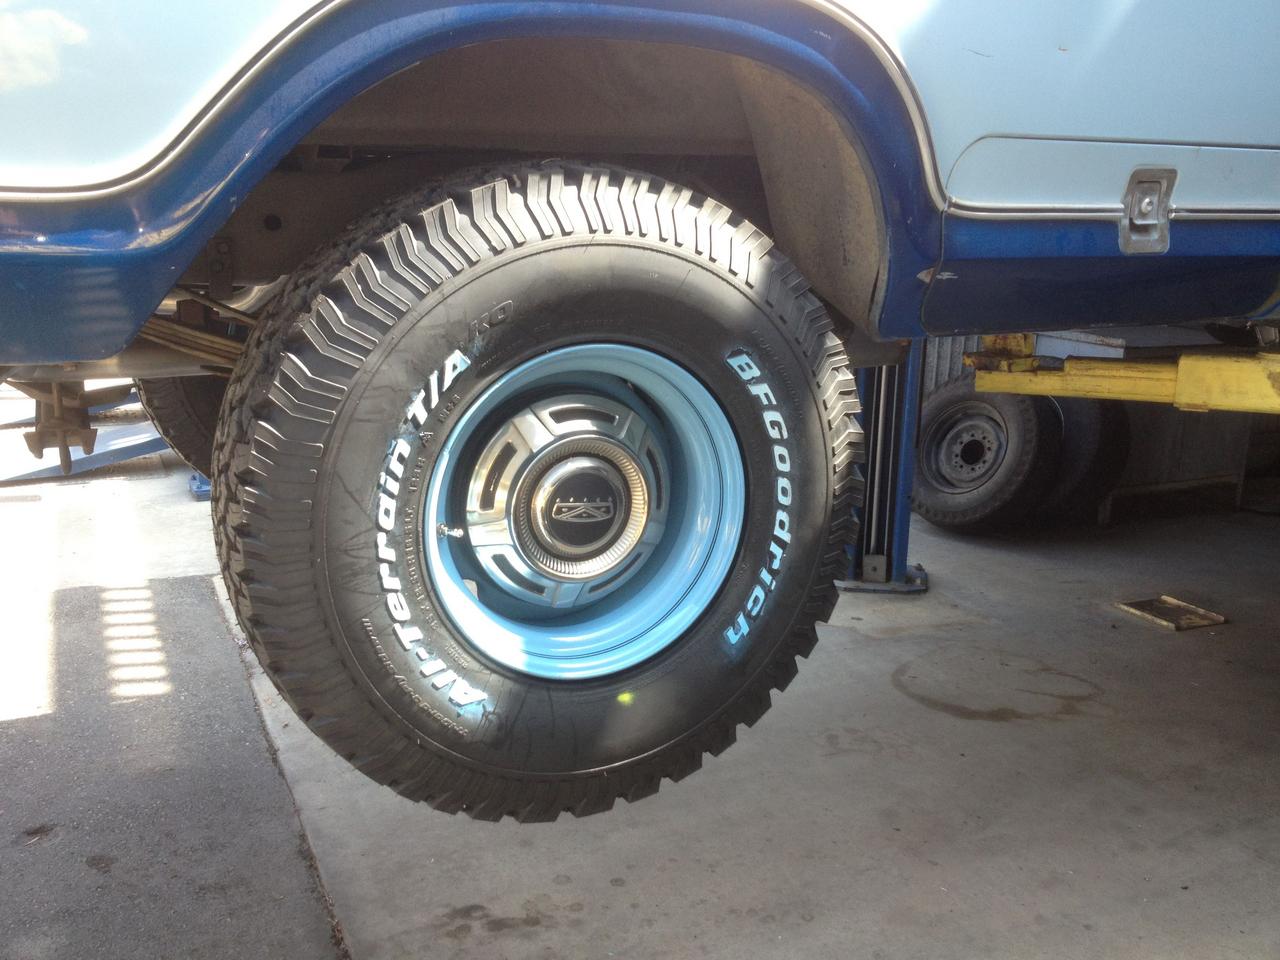 Ford Tires